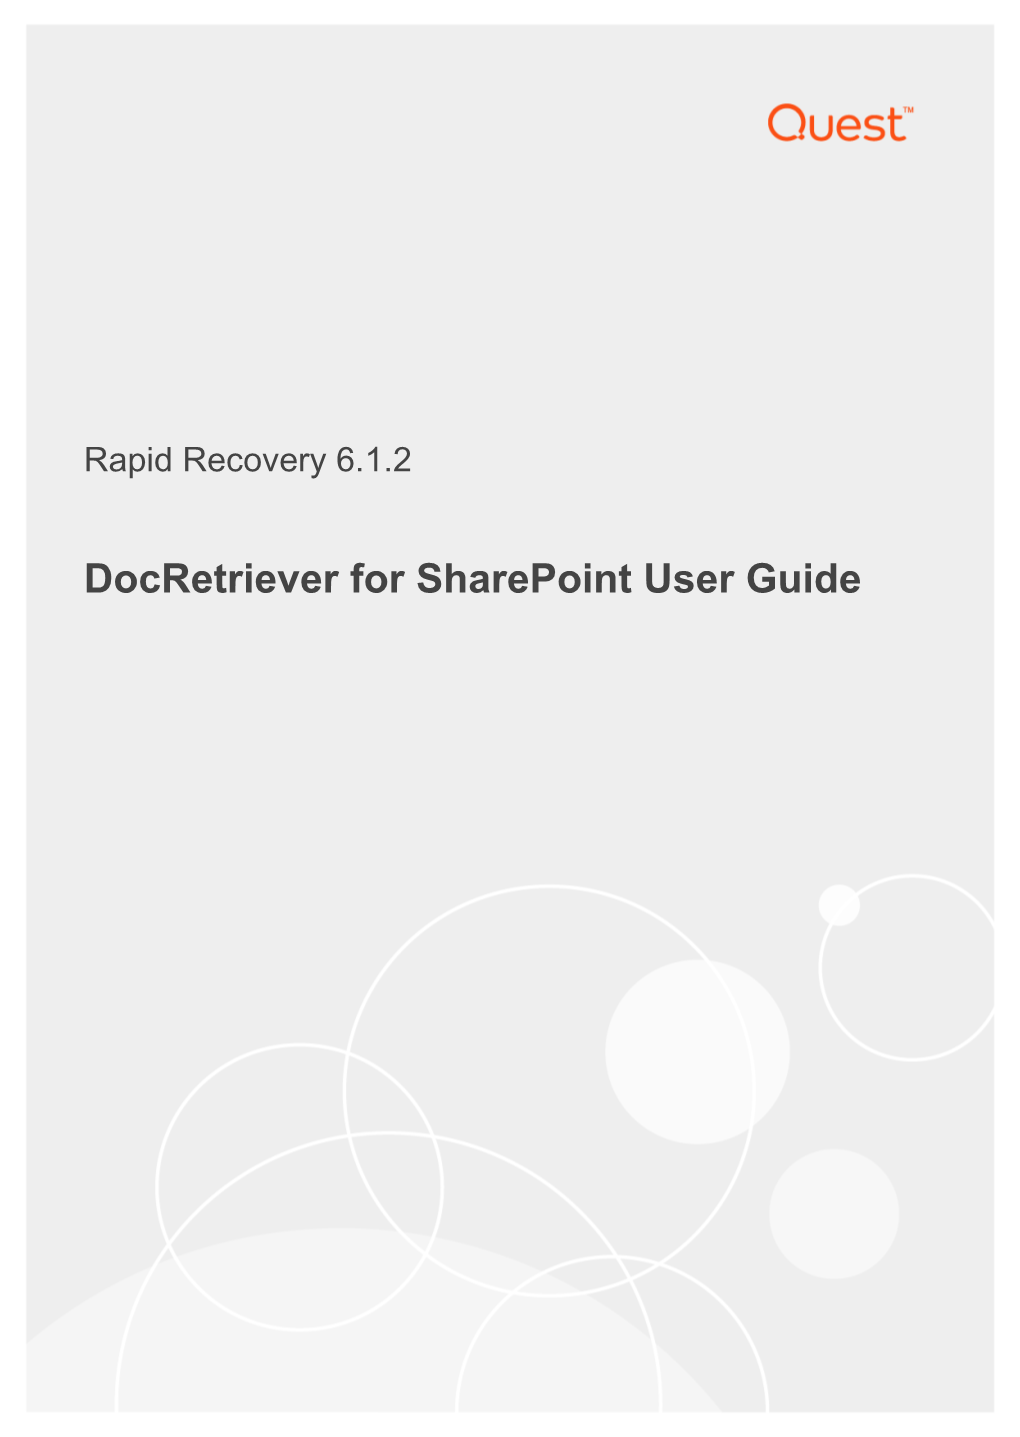 Docretriever for Sharepoint User Guide Table of Contents